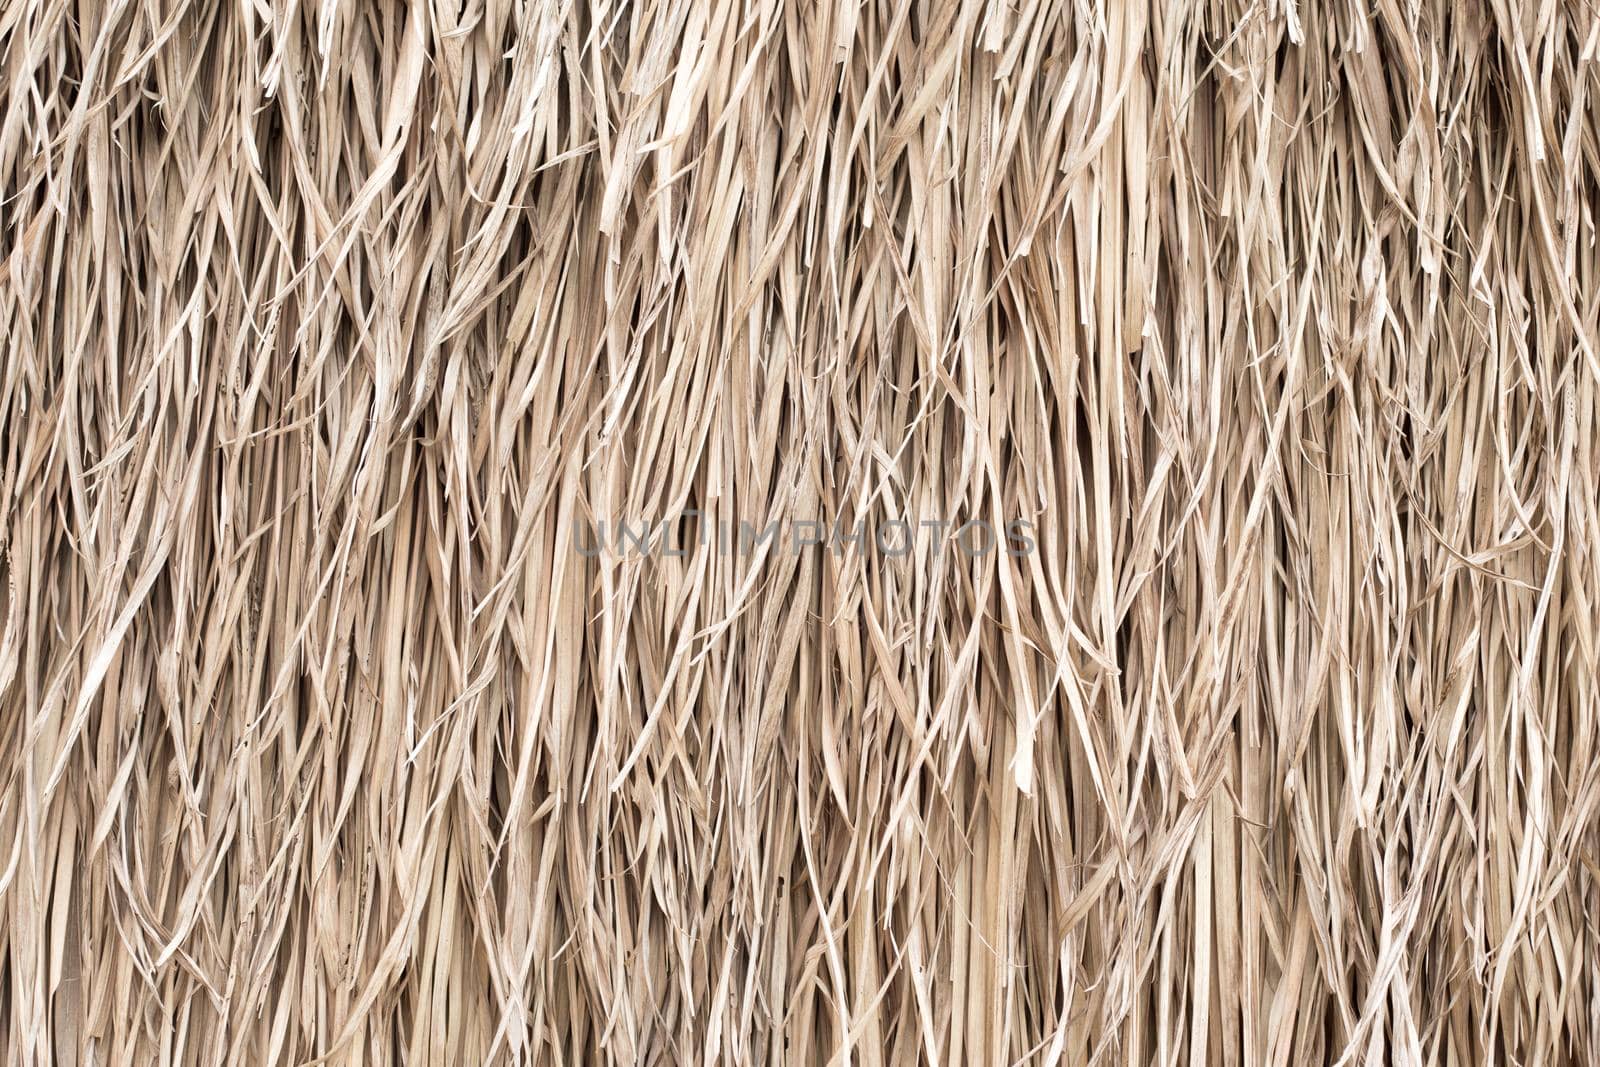 Straw texture. Tropic roof summer background